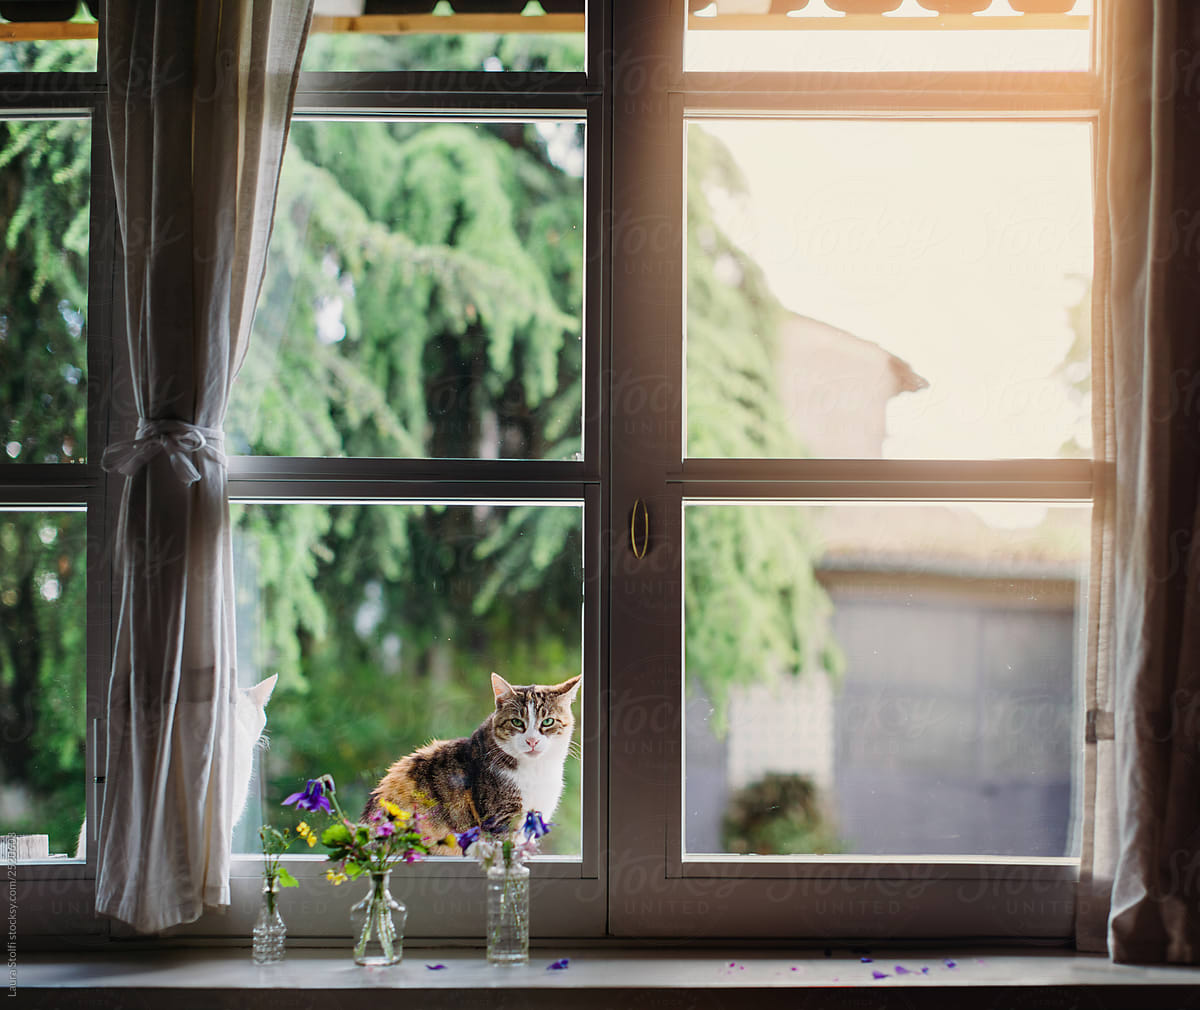 Cats behind windows glass and flower pots on the inside on windowsill in warm sunset light